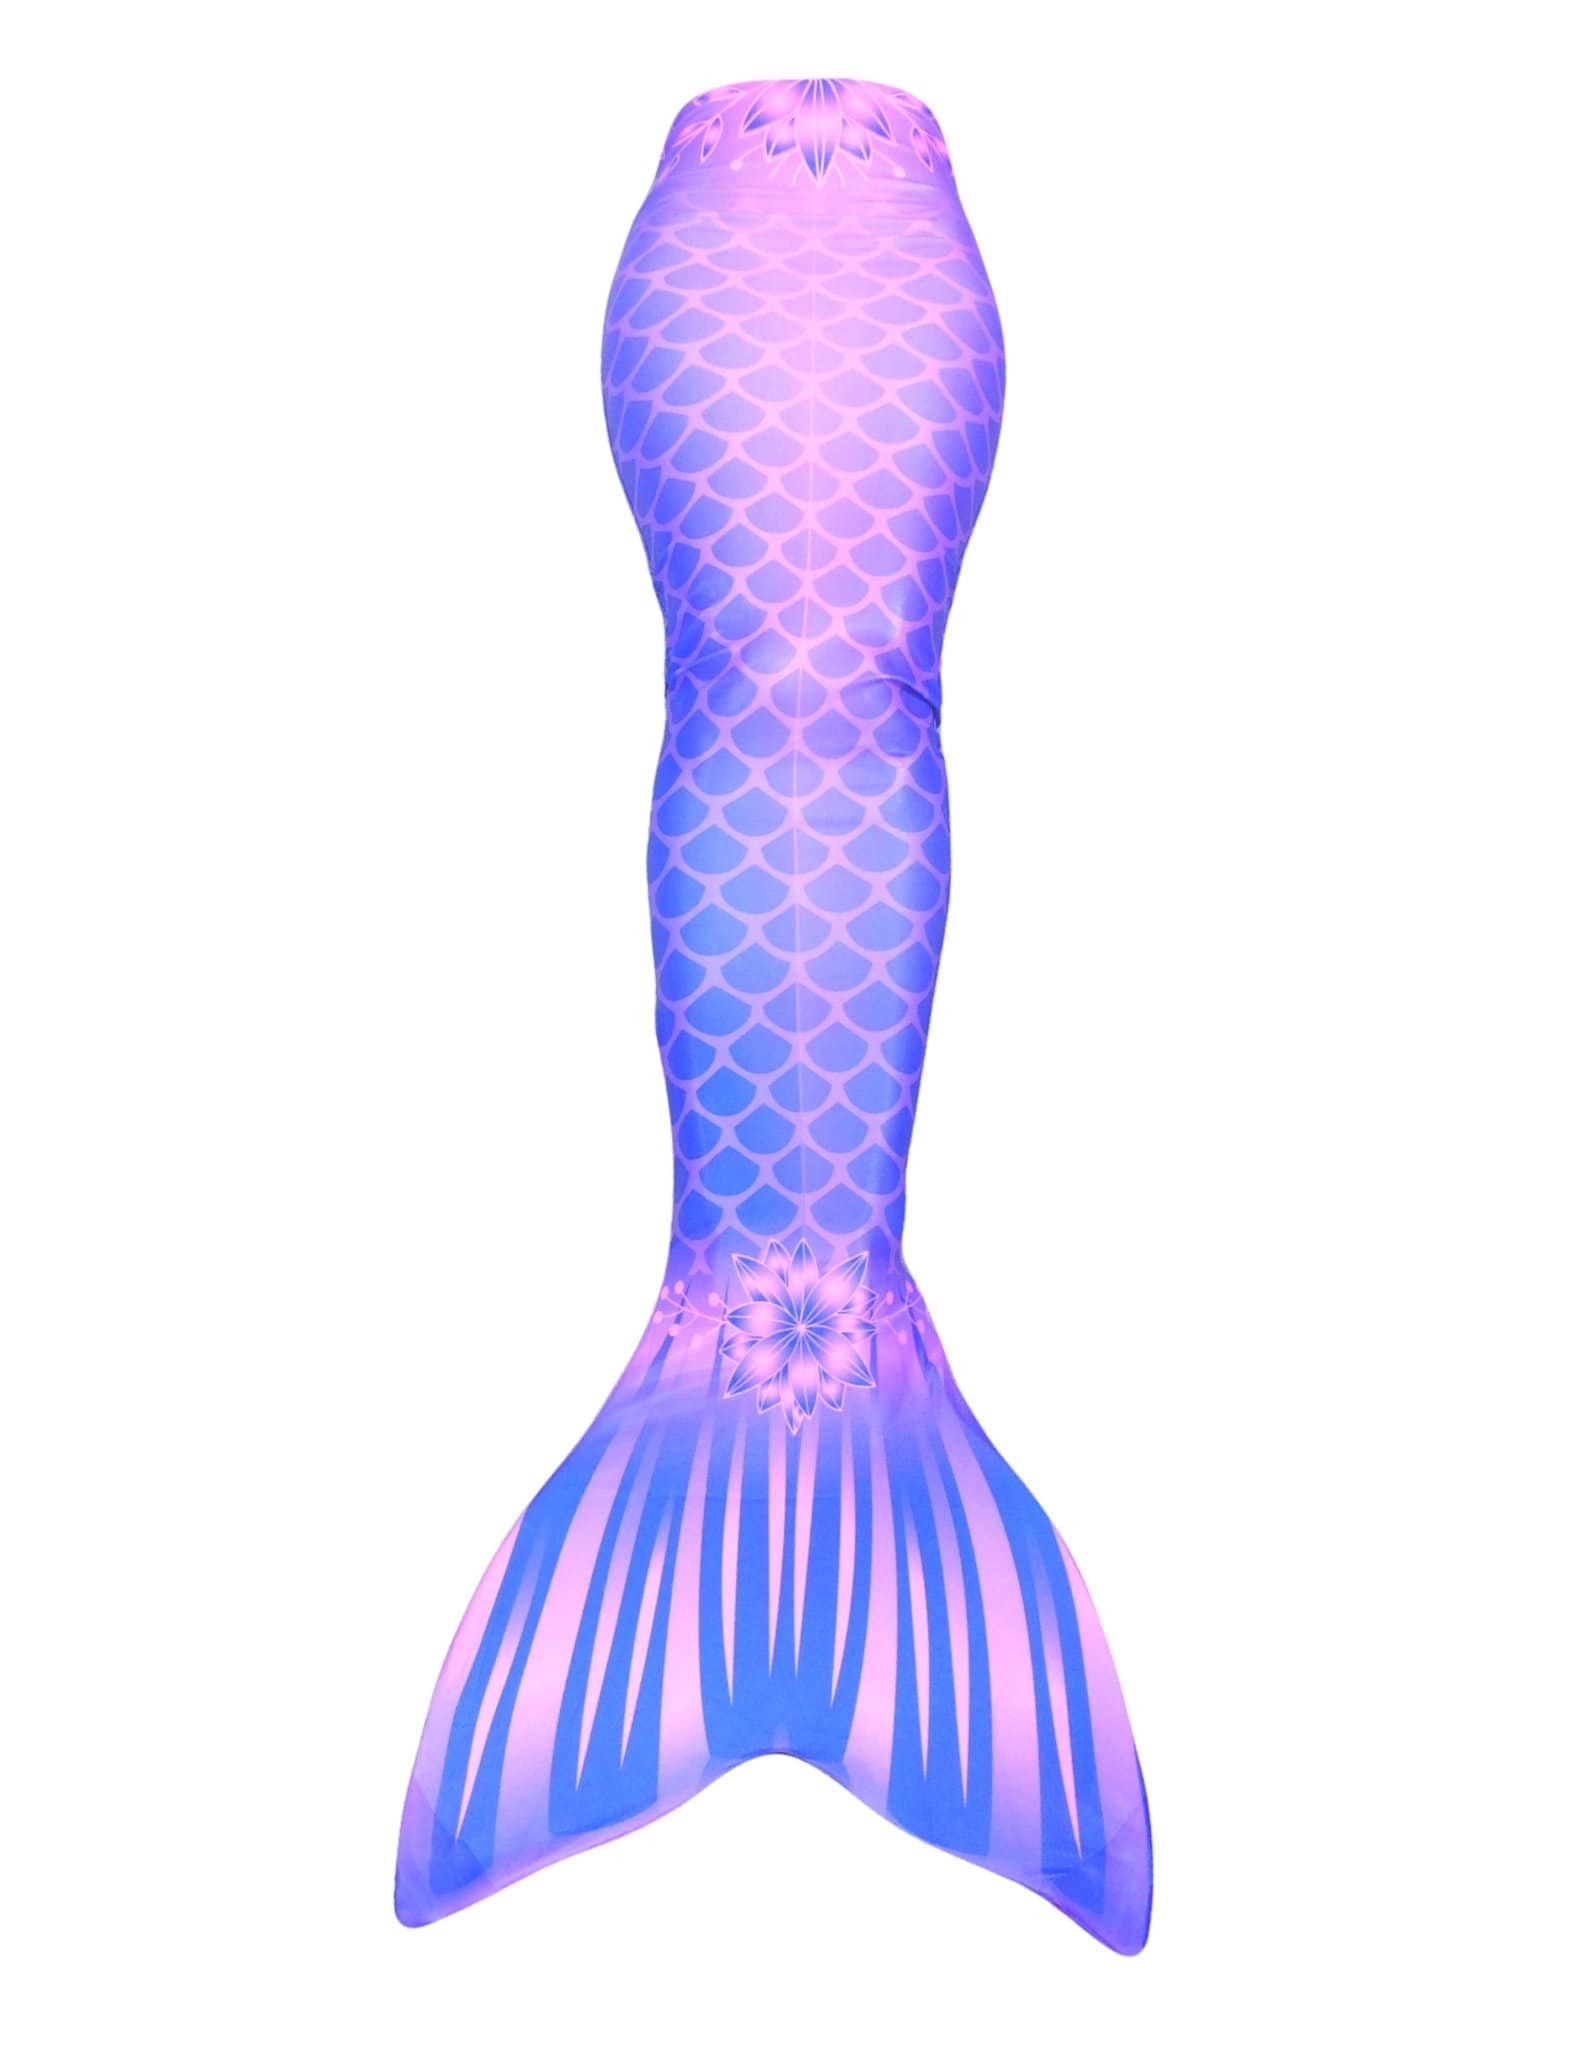 purple mermaid tail that is the perfect fabric mermaid tail for kids or adults